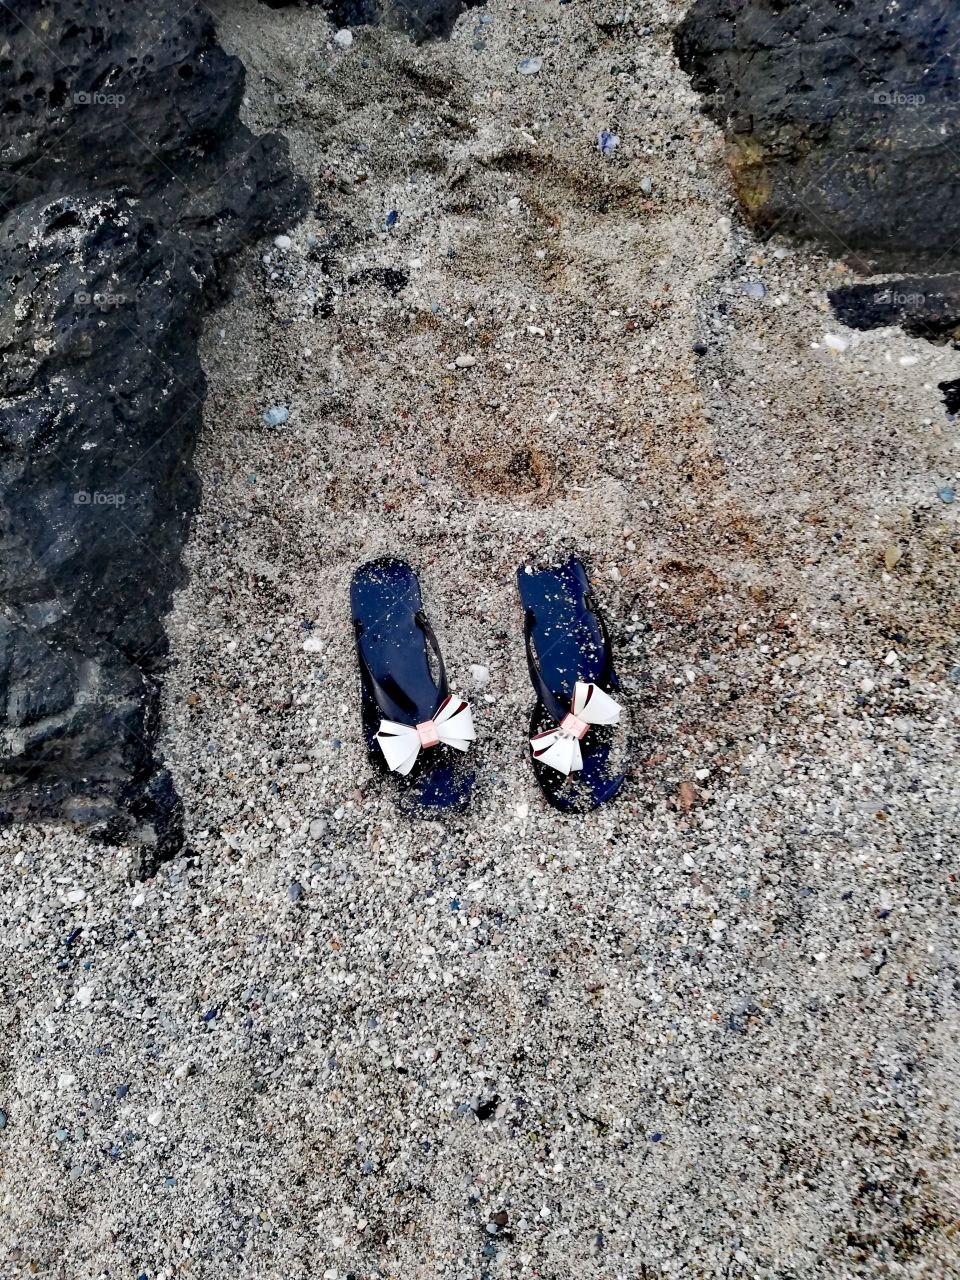 Ted Baker flip flops in sand surrounded by volcanic basaltic rock